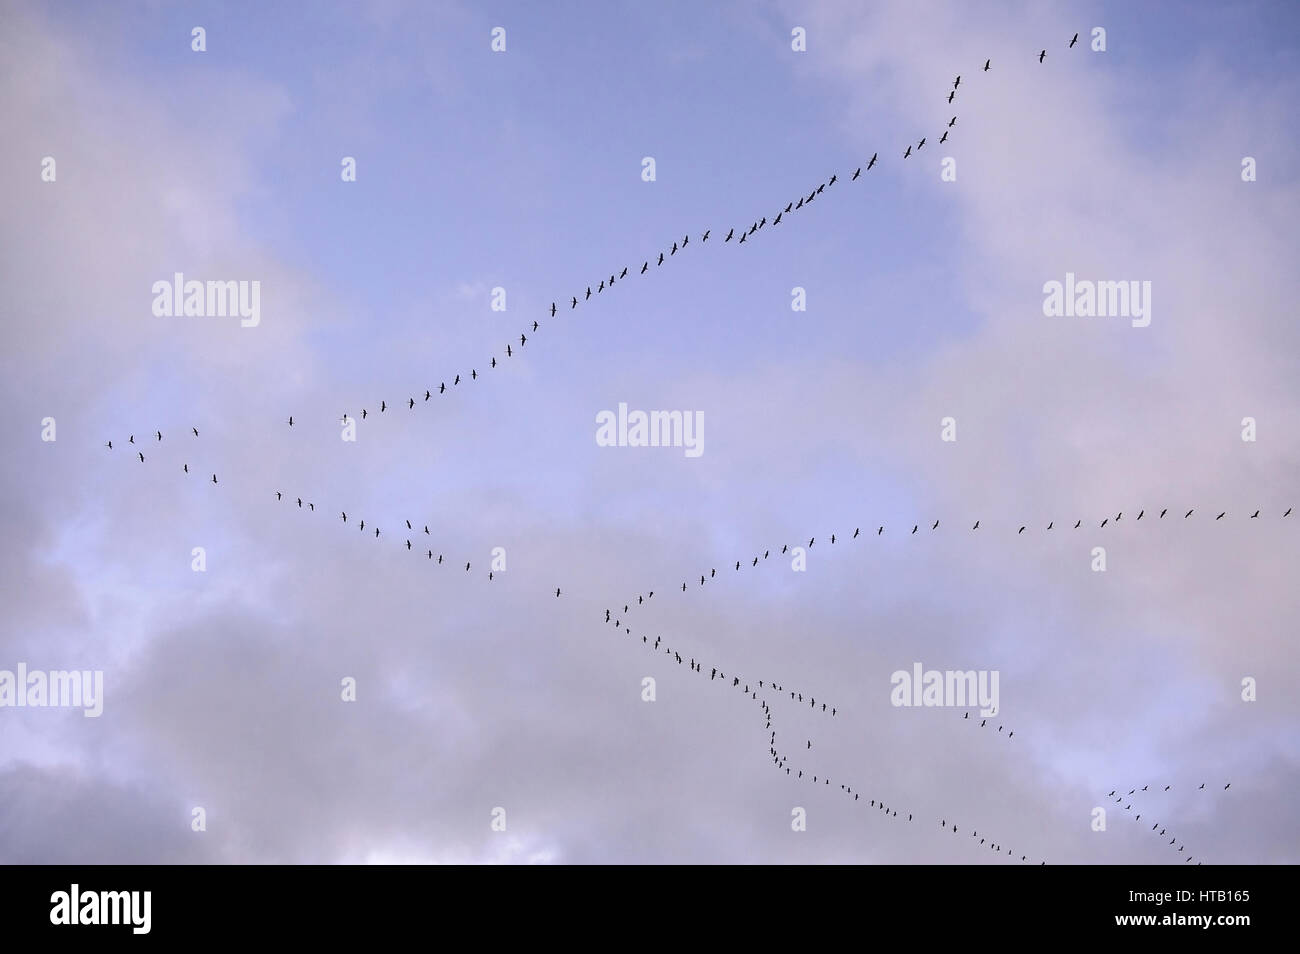 Migration of birds of the cranes - typical formation, crane, bird of the luck, Vogelzug der Kraniche - typische Formation, Kranich, Vogel des Gluecks Stock Photo